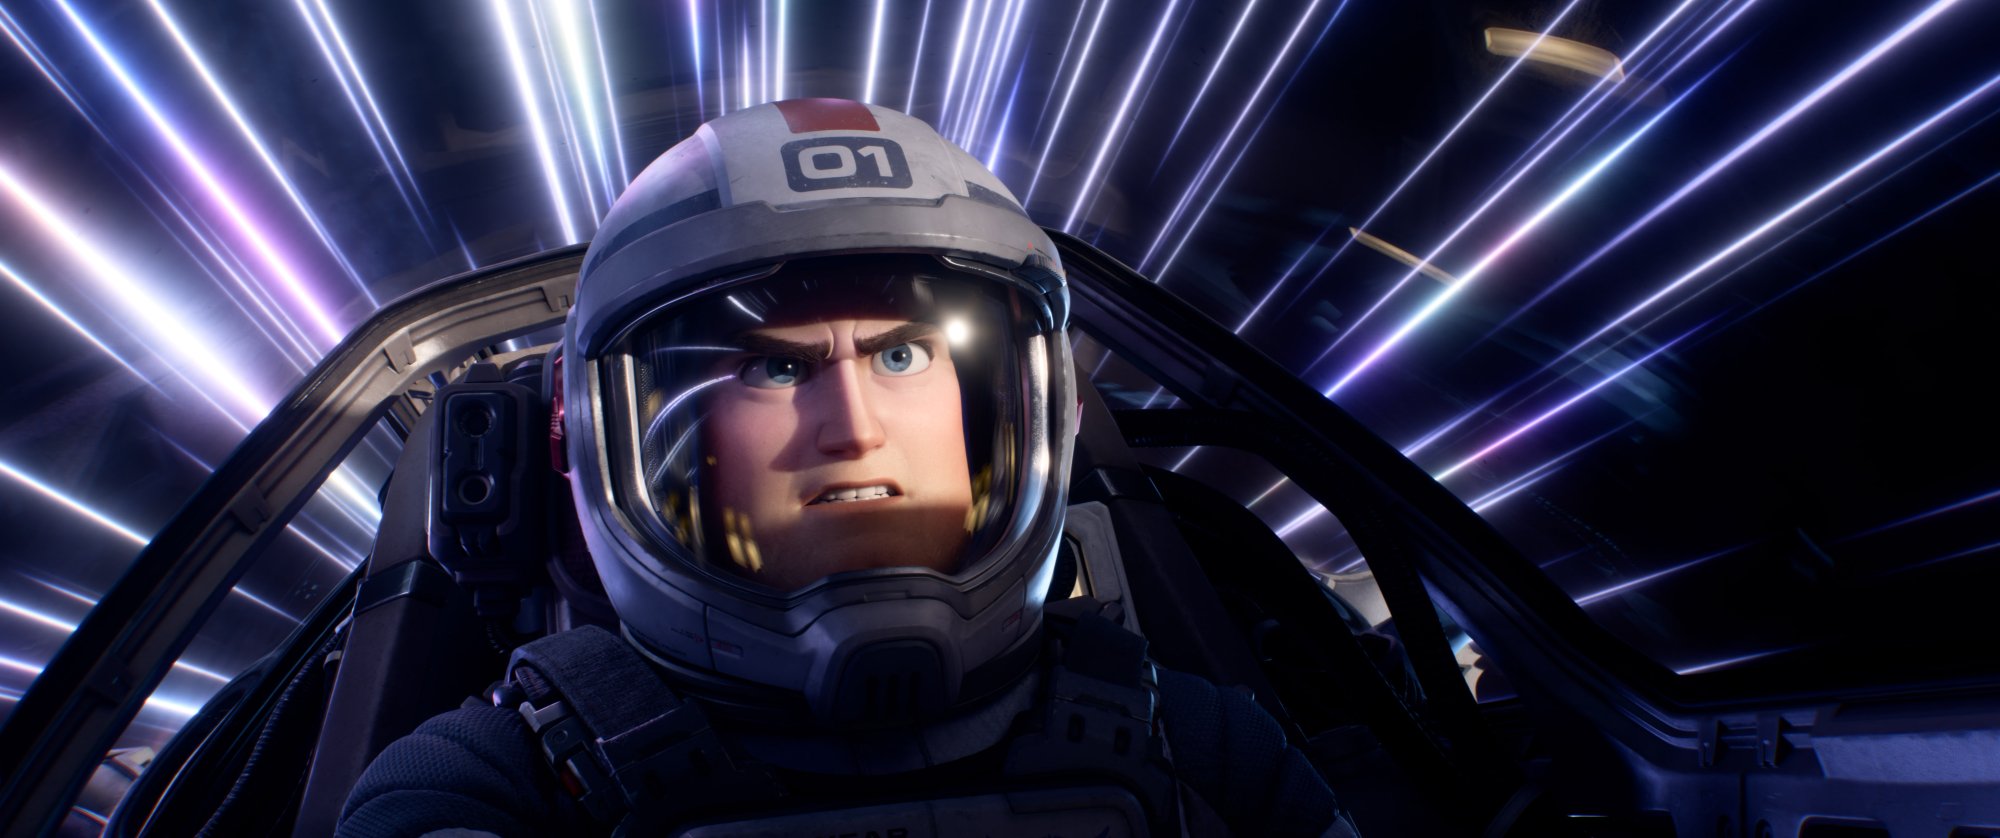 'Lightyear' Buzz Lighter voiced by Chris Evans, who answered what his favorite Pixar movie is. Buzz has a serious look in his space helmet going through hyperspeed.